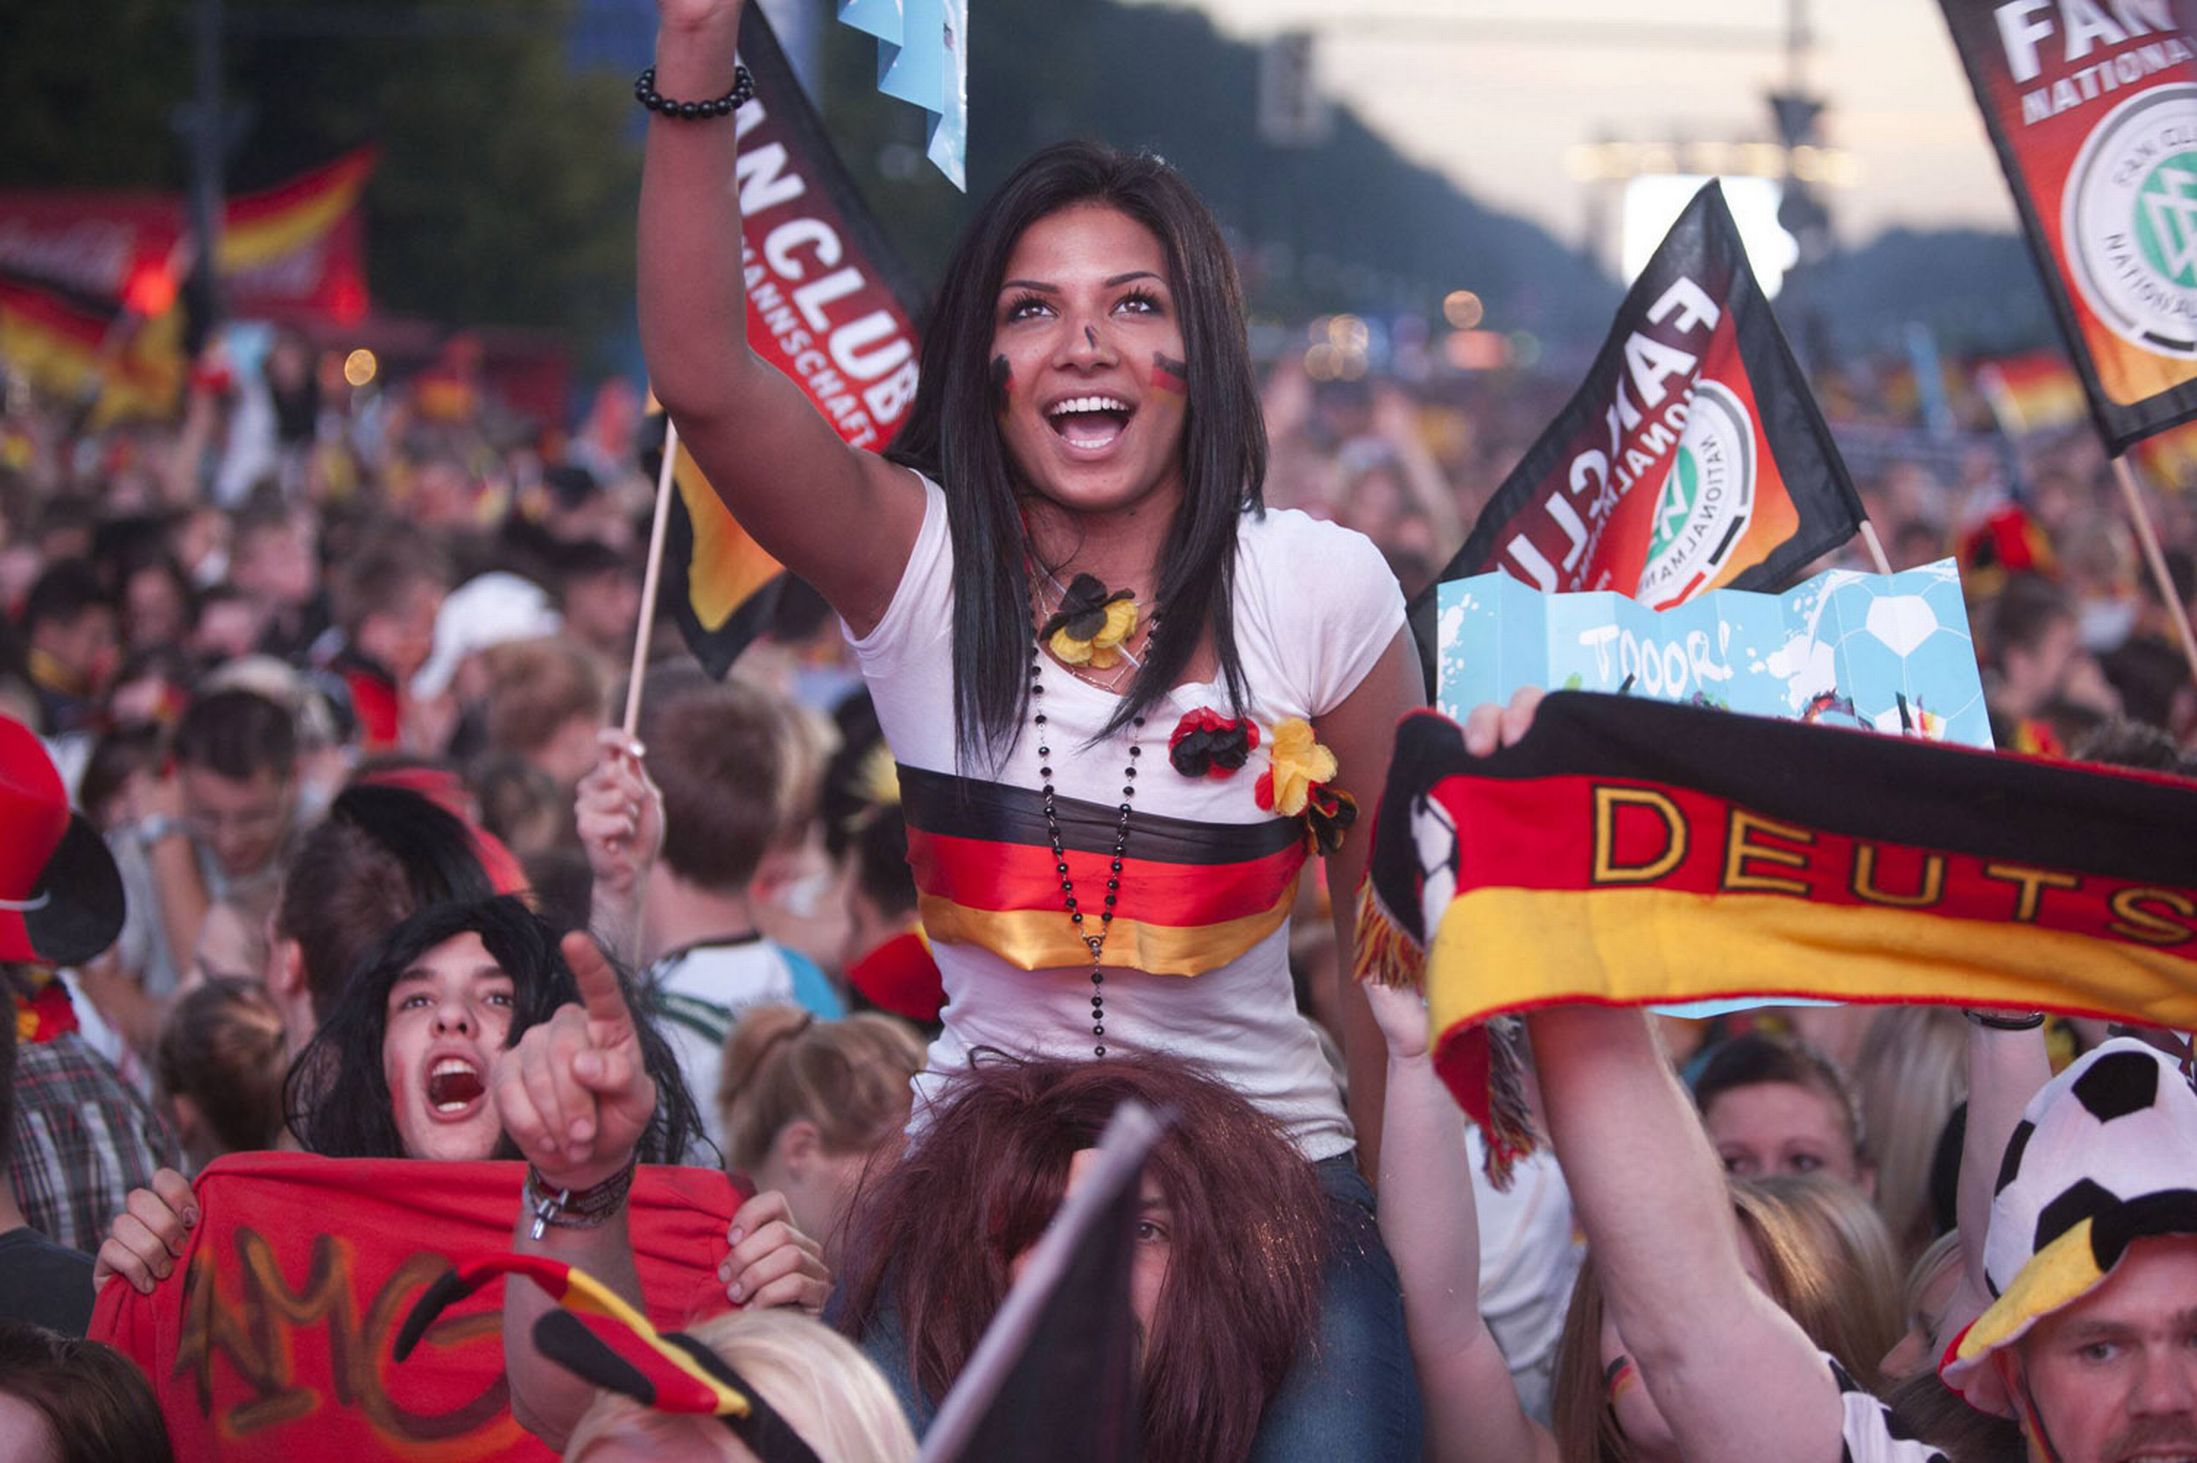 German+football+fans+before+the+UEFA+EURO+2012+group+B+match+between+Denmark+and+Germany